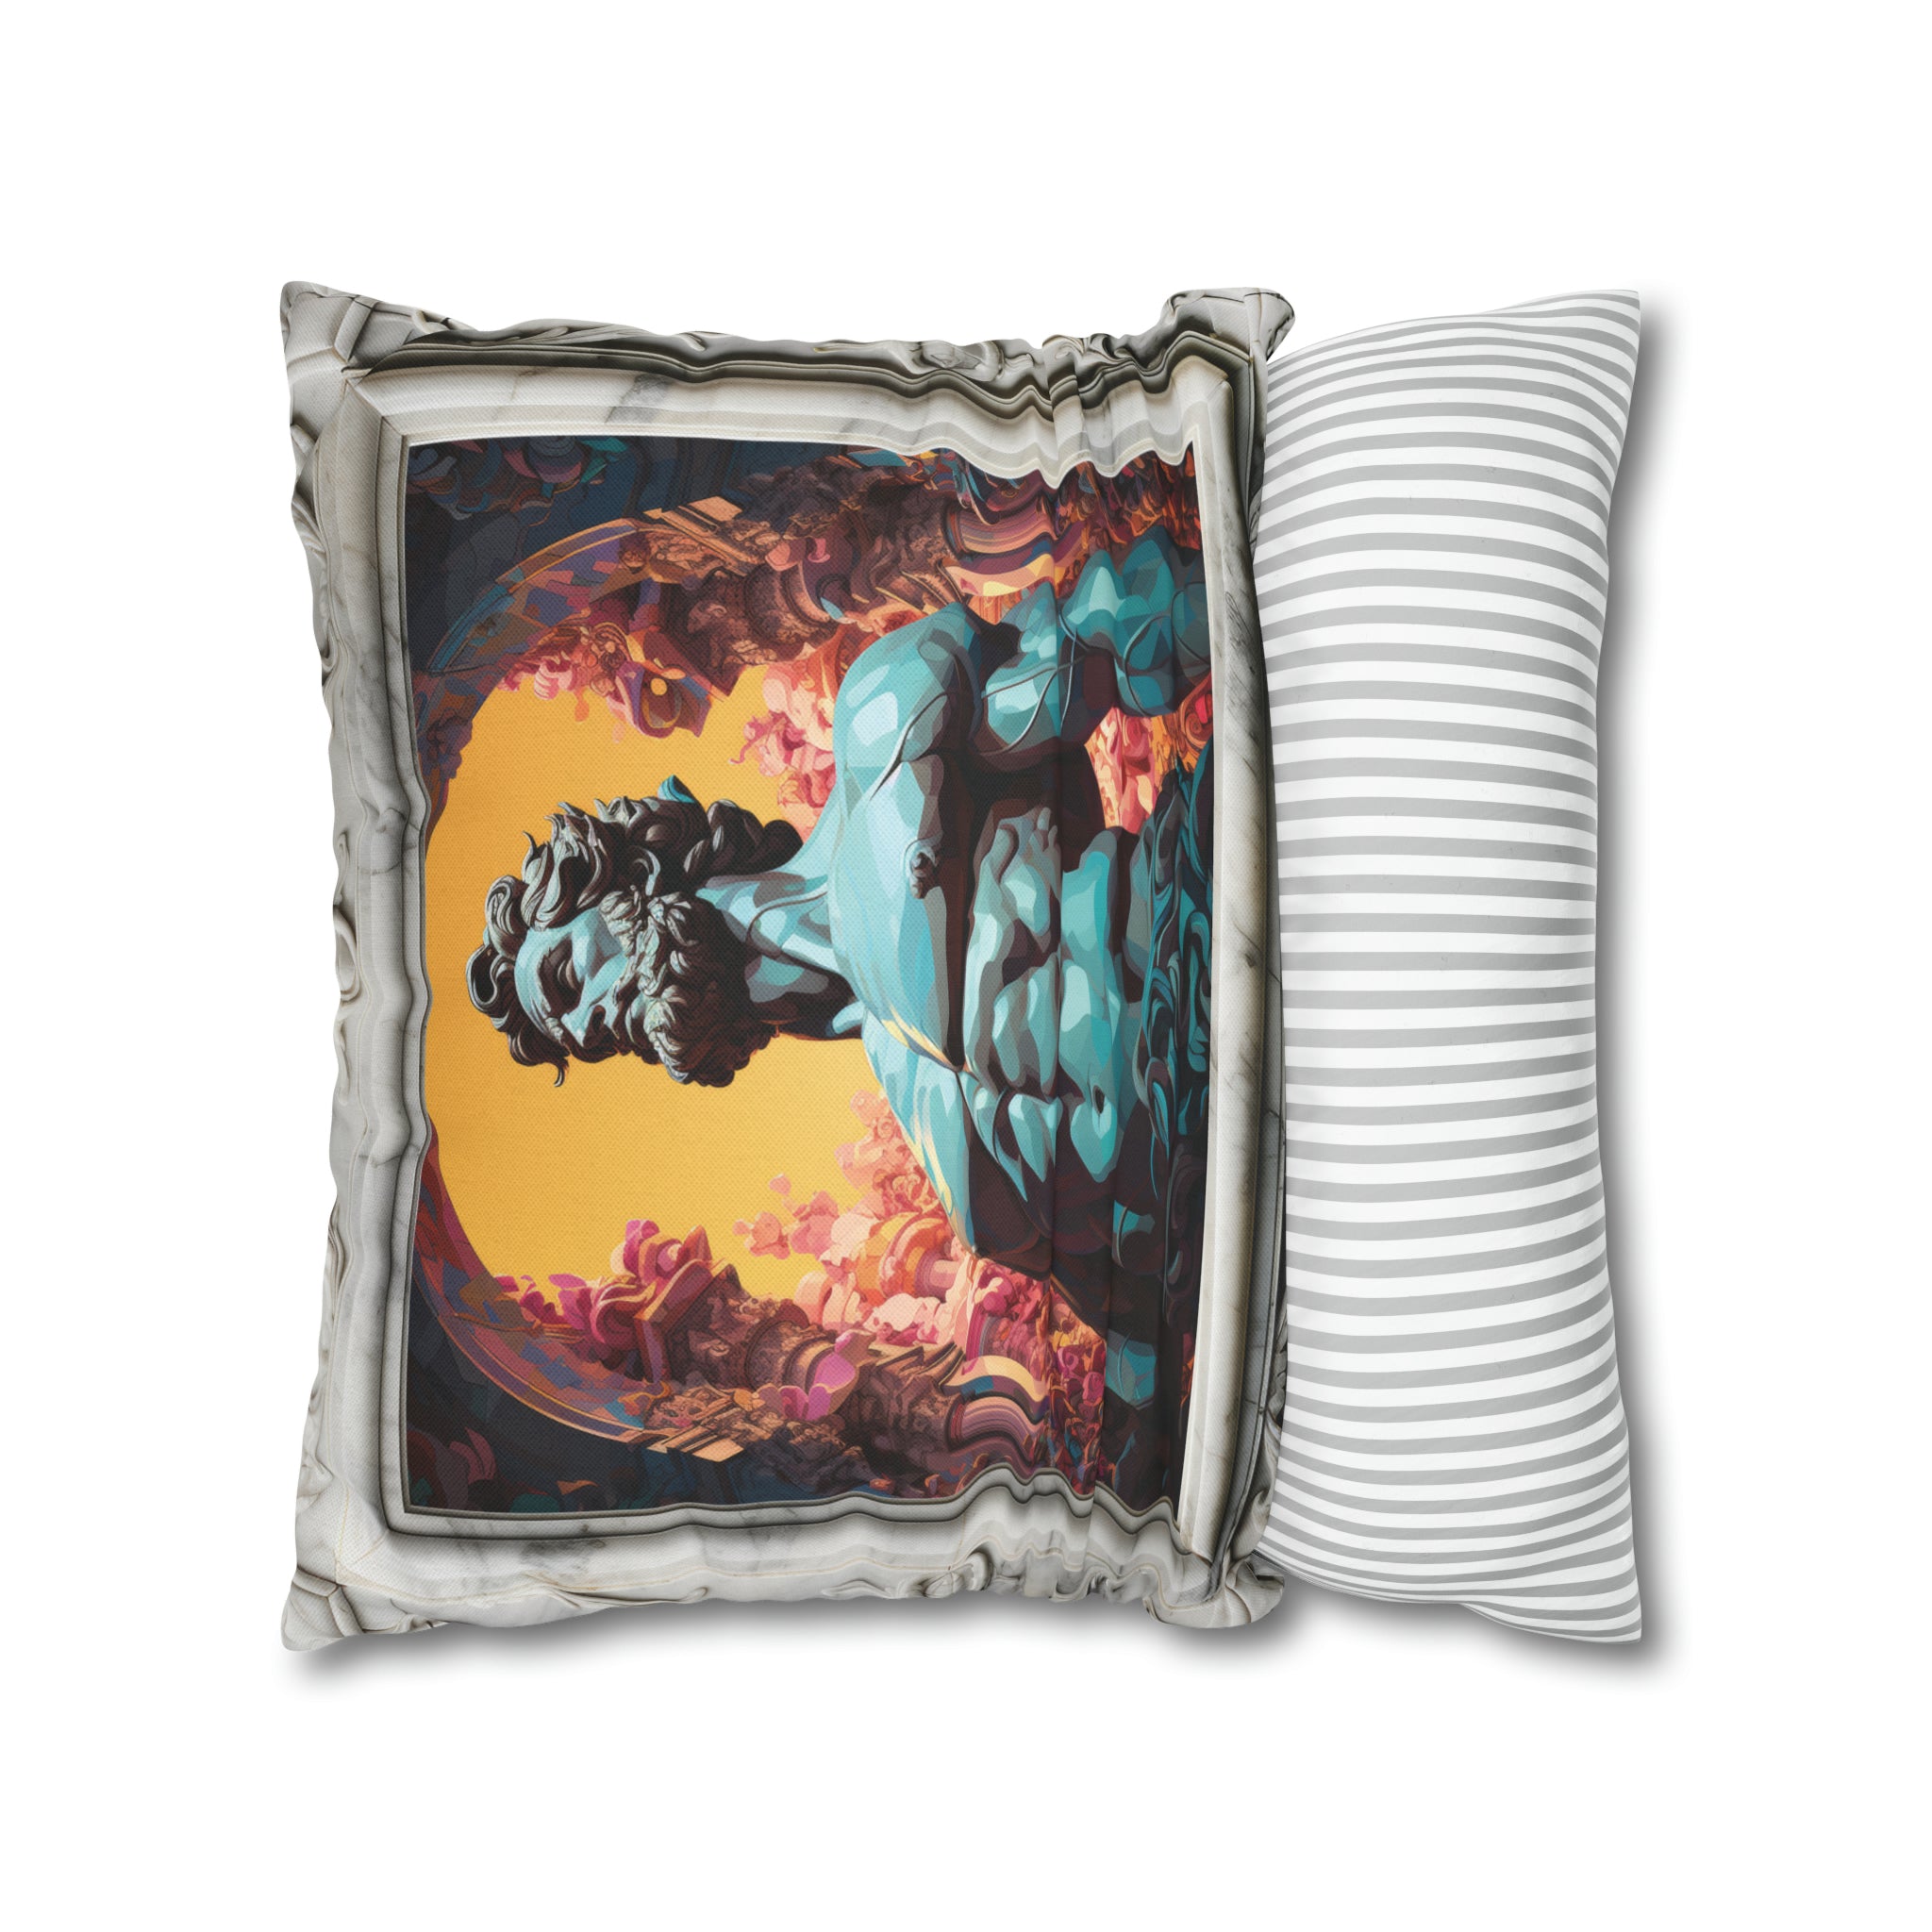 Hercules in a marble frame 18 x 18 Spun Polyester Square Pillow Case